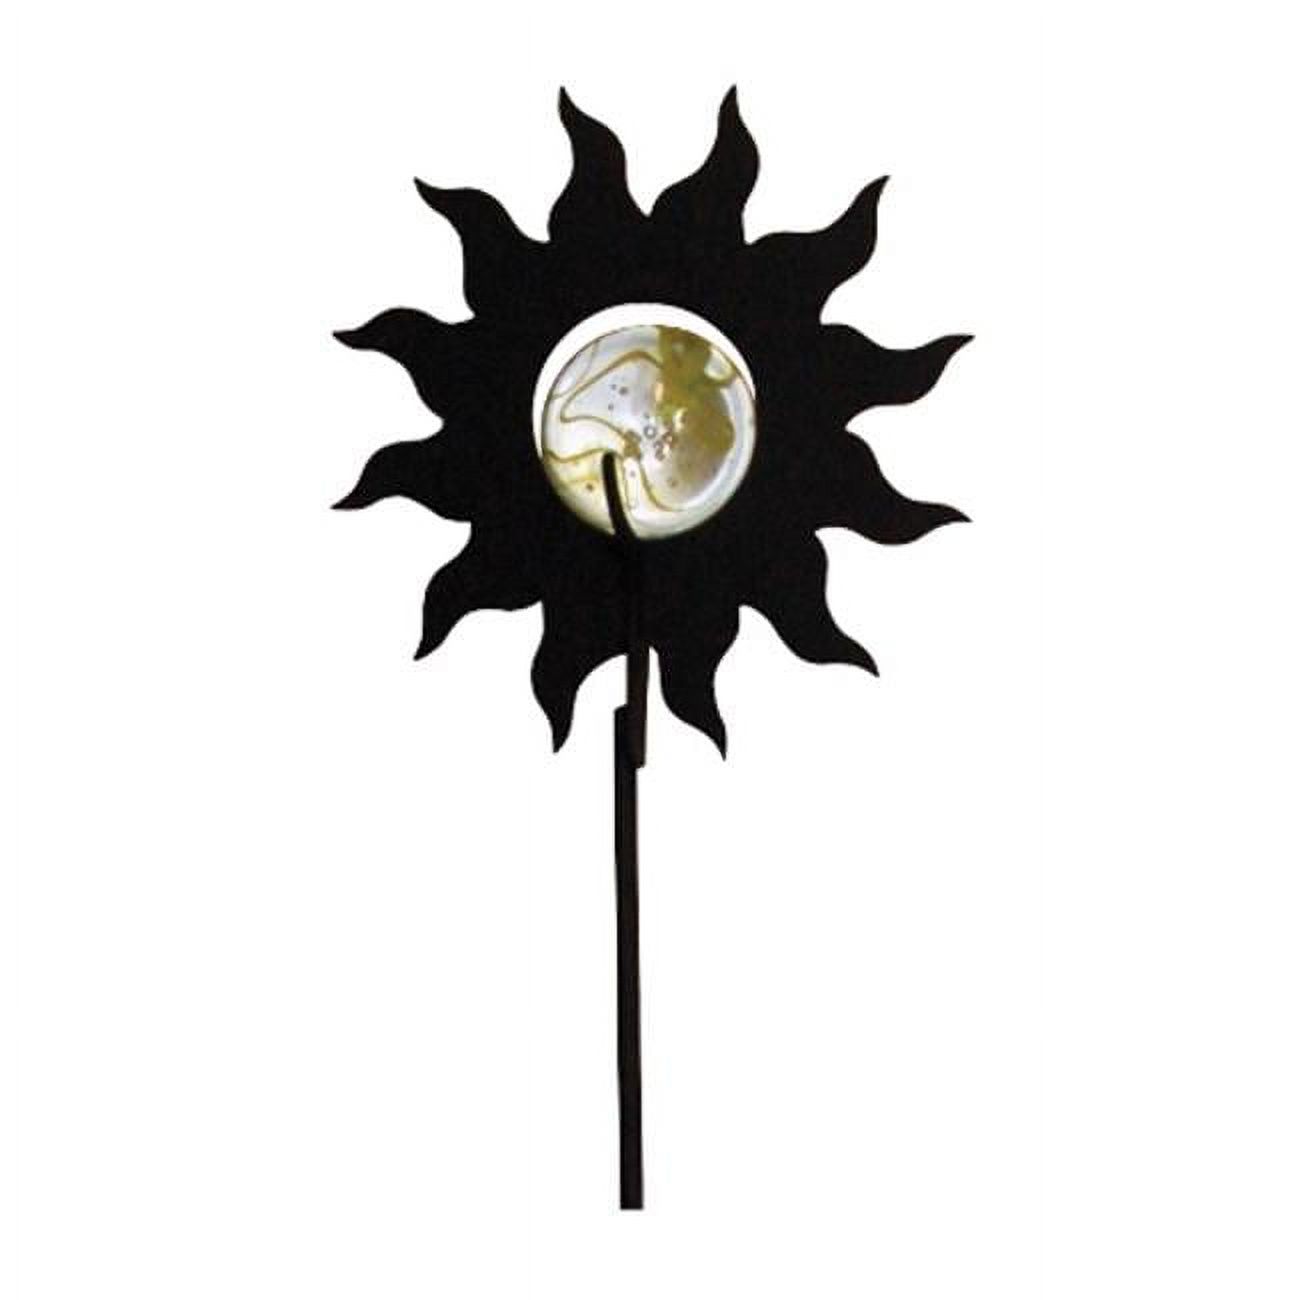 Village Wrought Iron MGS-97 Sun Marble Garden Stake - image 1 of 1